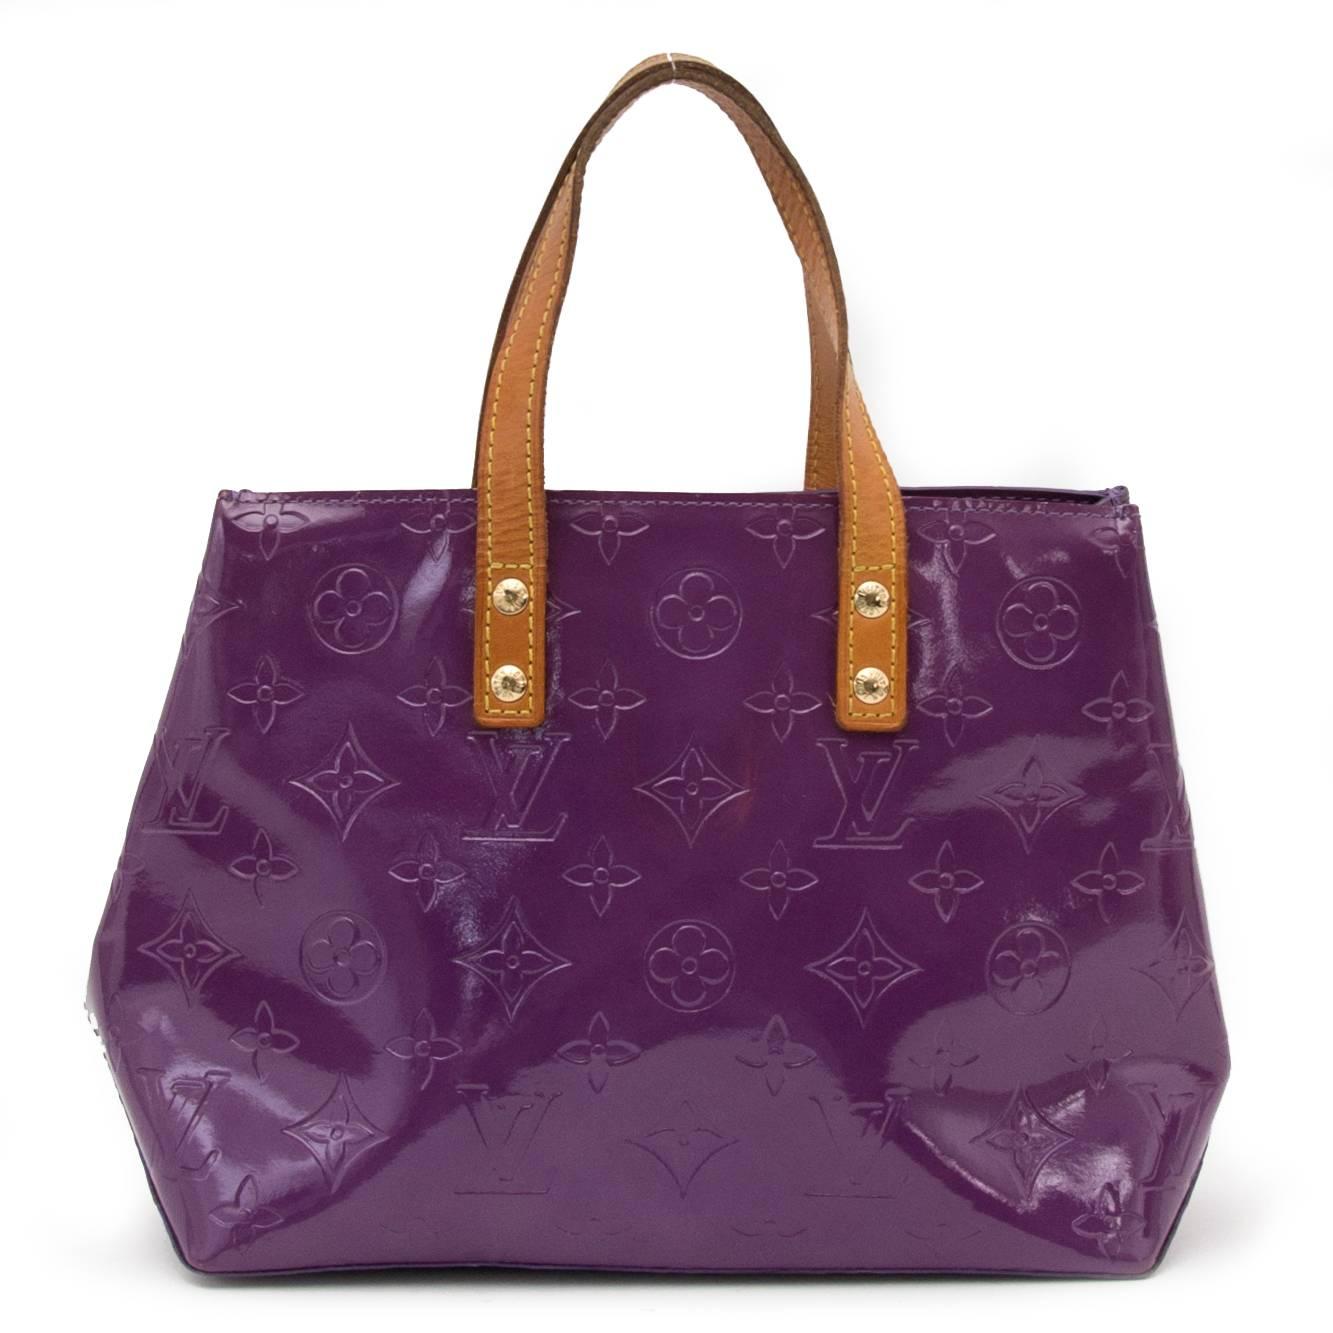 Very good preloved condition

Estimated retail price: €670,-

Louis Vuitton Vernis Reade PM Violette Top Handle Bag

This beautiful Louis Vuitton bag comes in violette monogram embossed coated leather with simple cowhide leather strap top